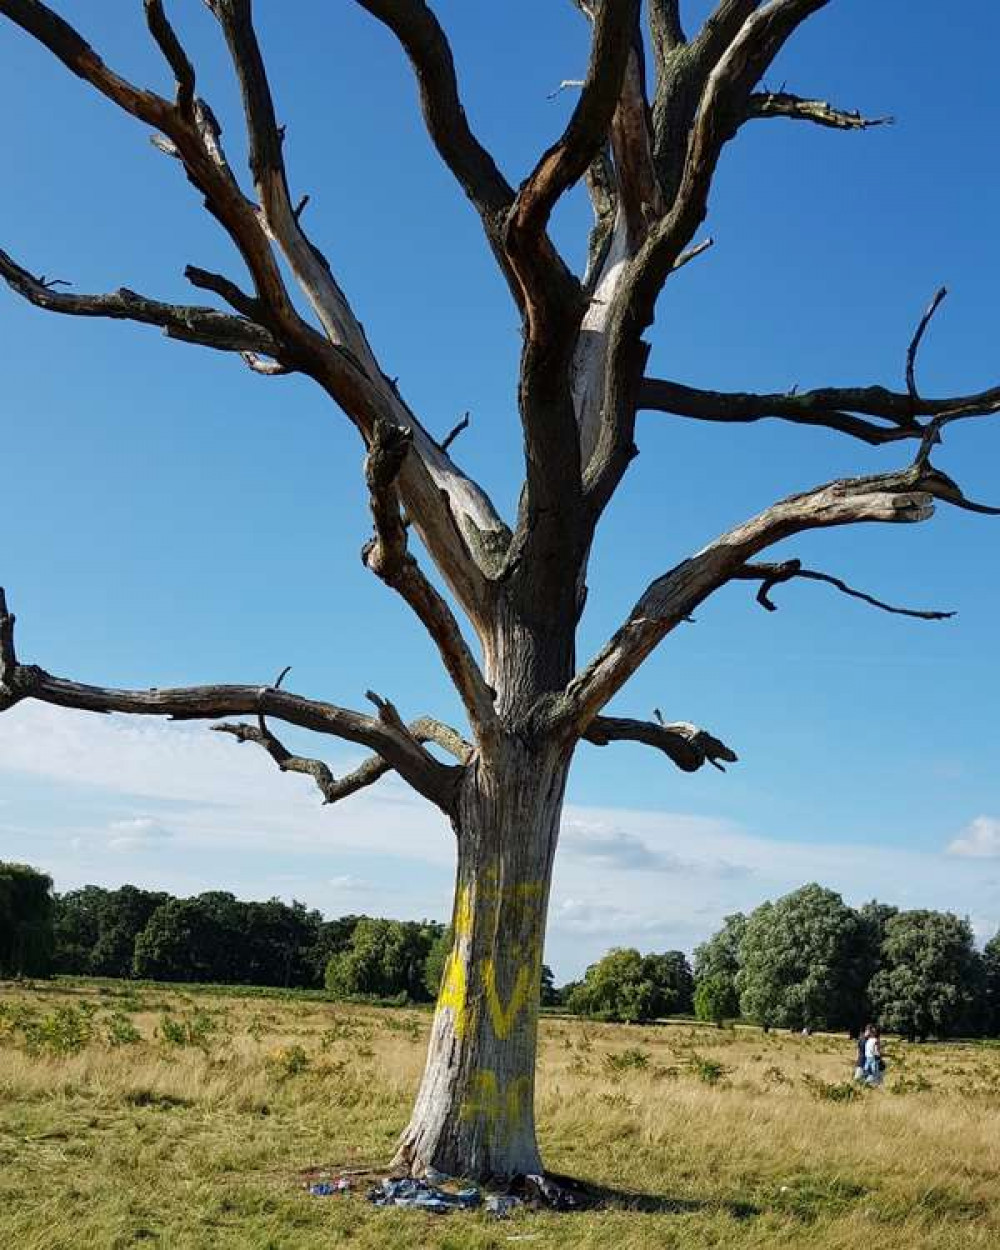 Graffiti was found on a tree in Bushy Park this morning (Image: Royal Park Police)